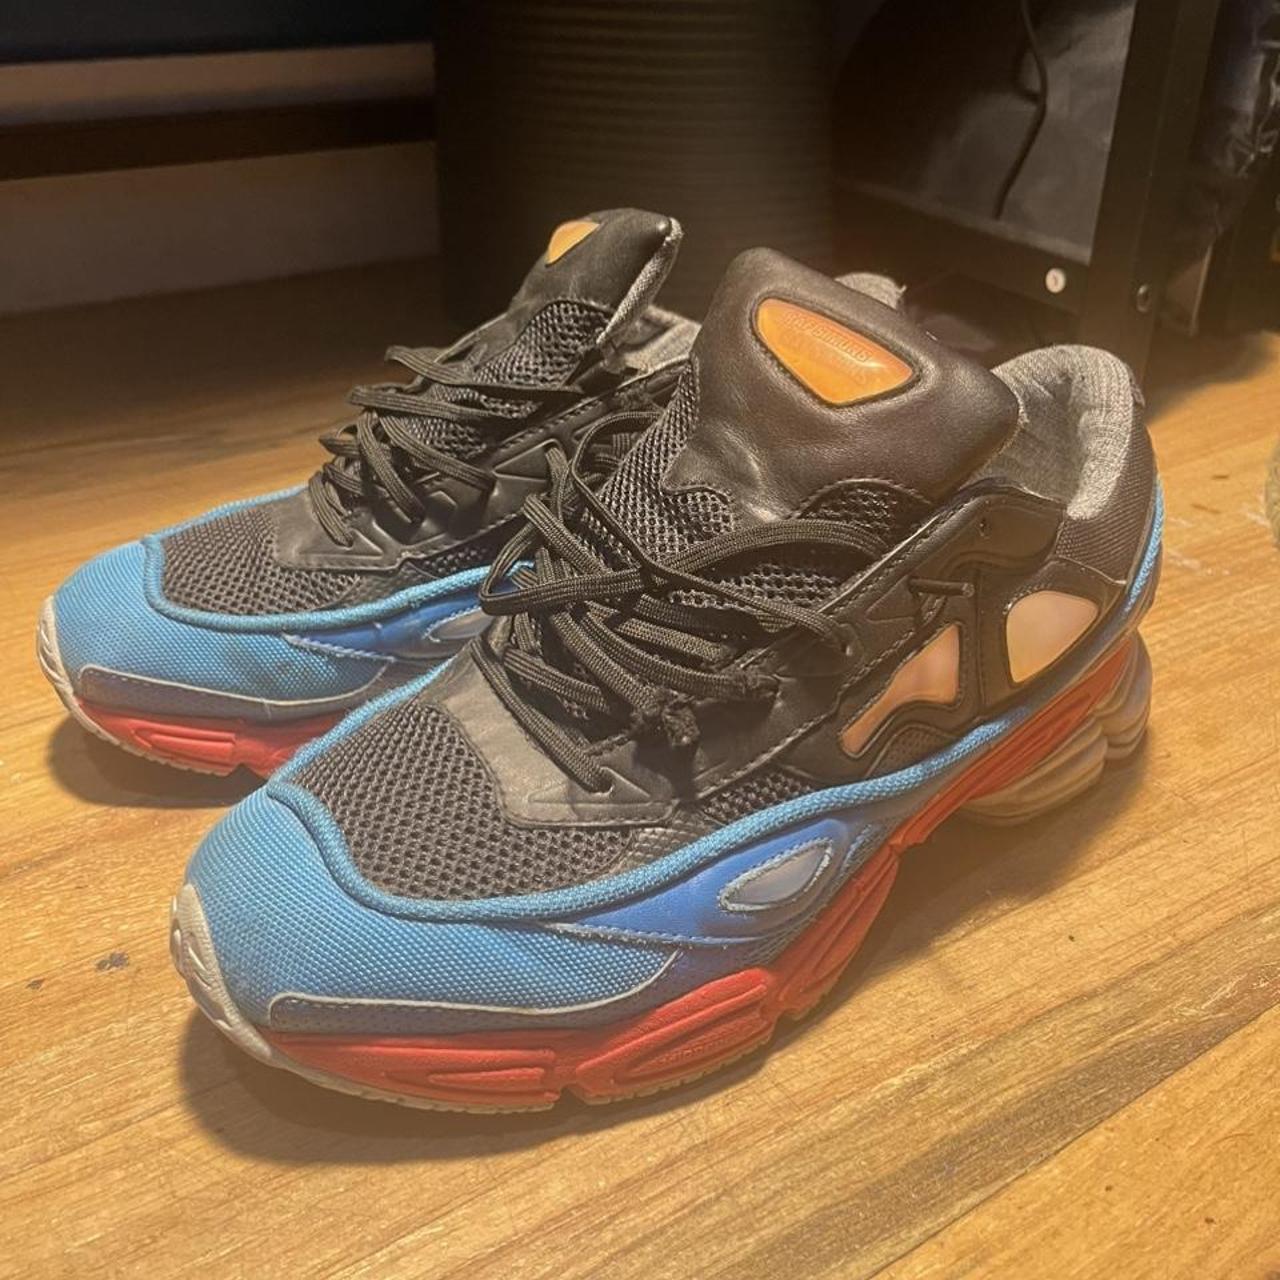 Raf Simons Men's Blue and Red Trainers